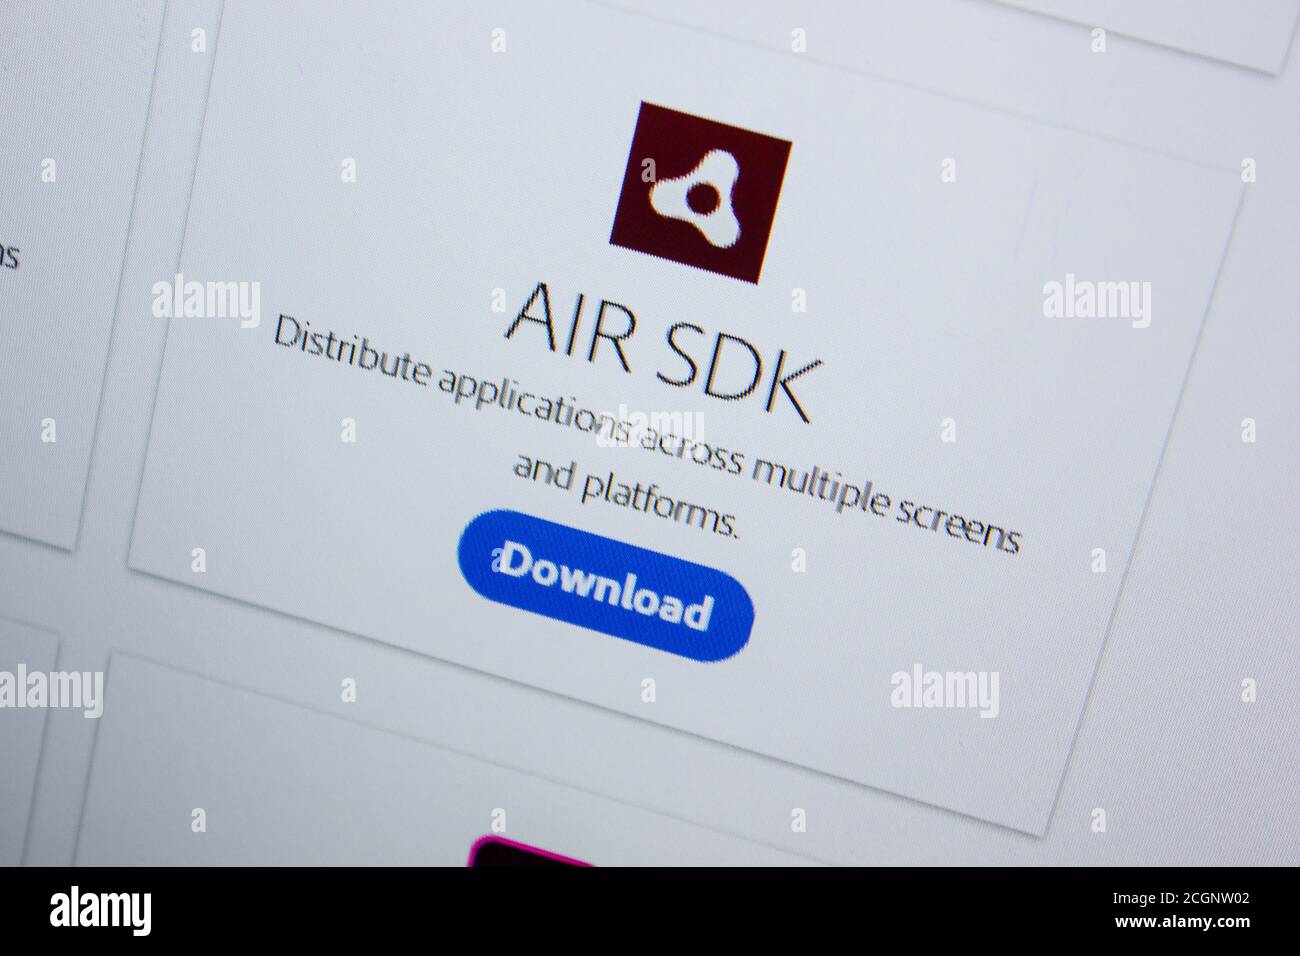 Ryazan, Russia - July 11, 2018: Adobe AIR SDK, software logo on the official website of Adobe Stock Photo